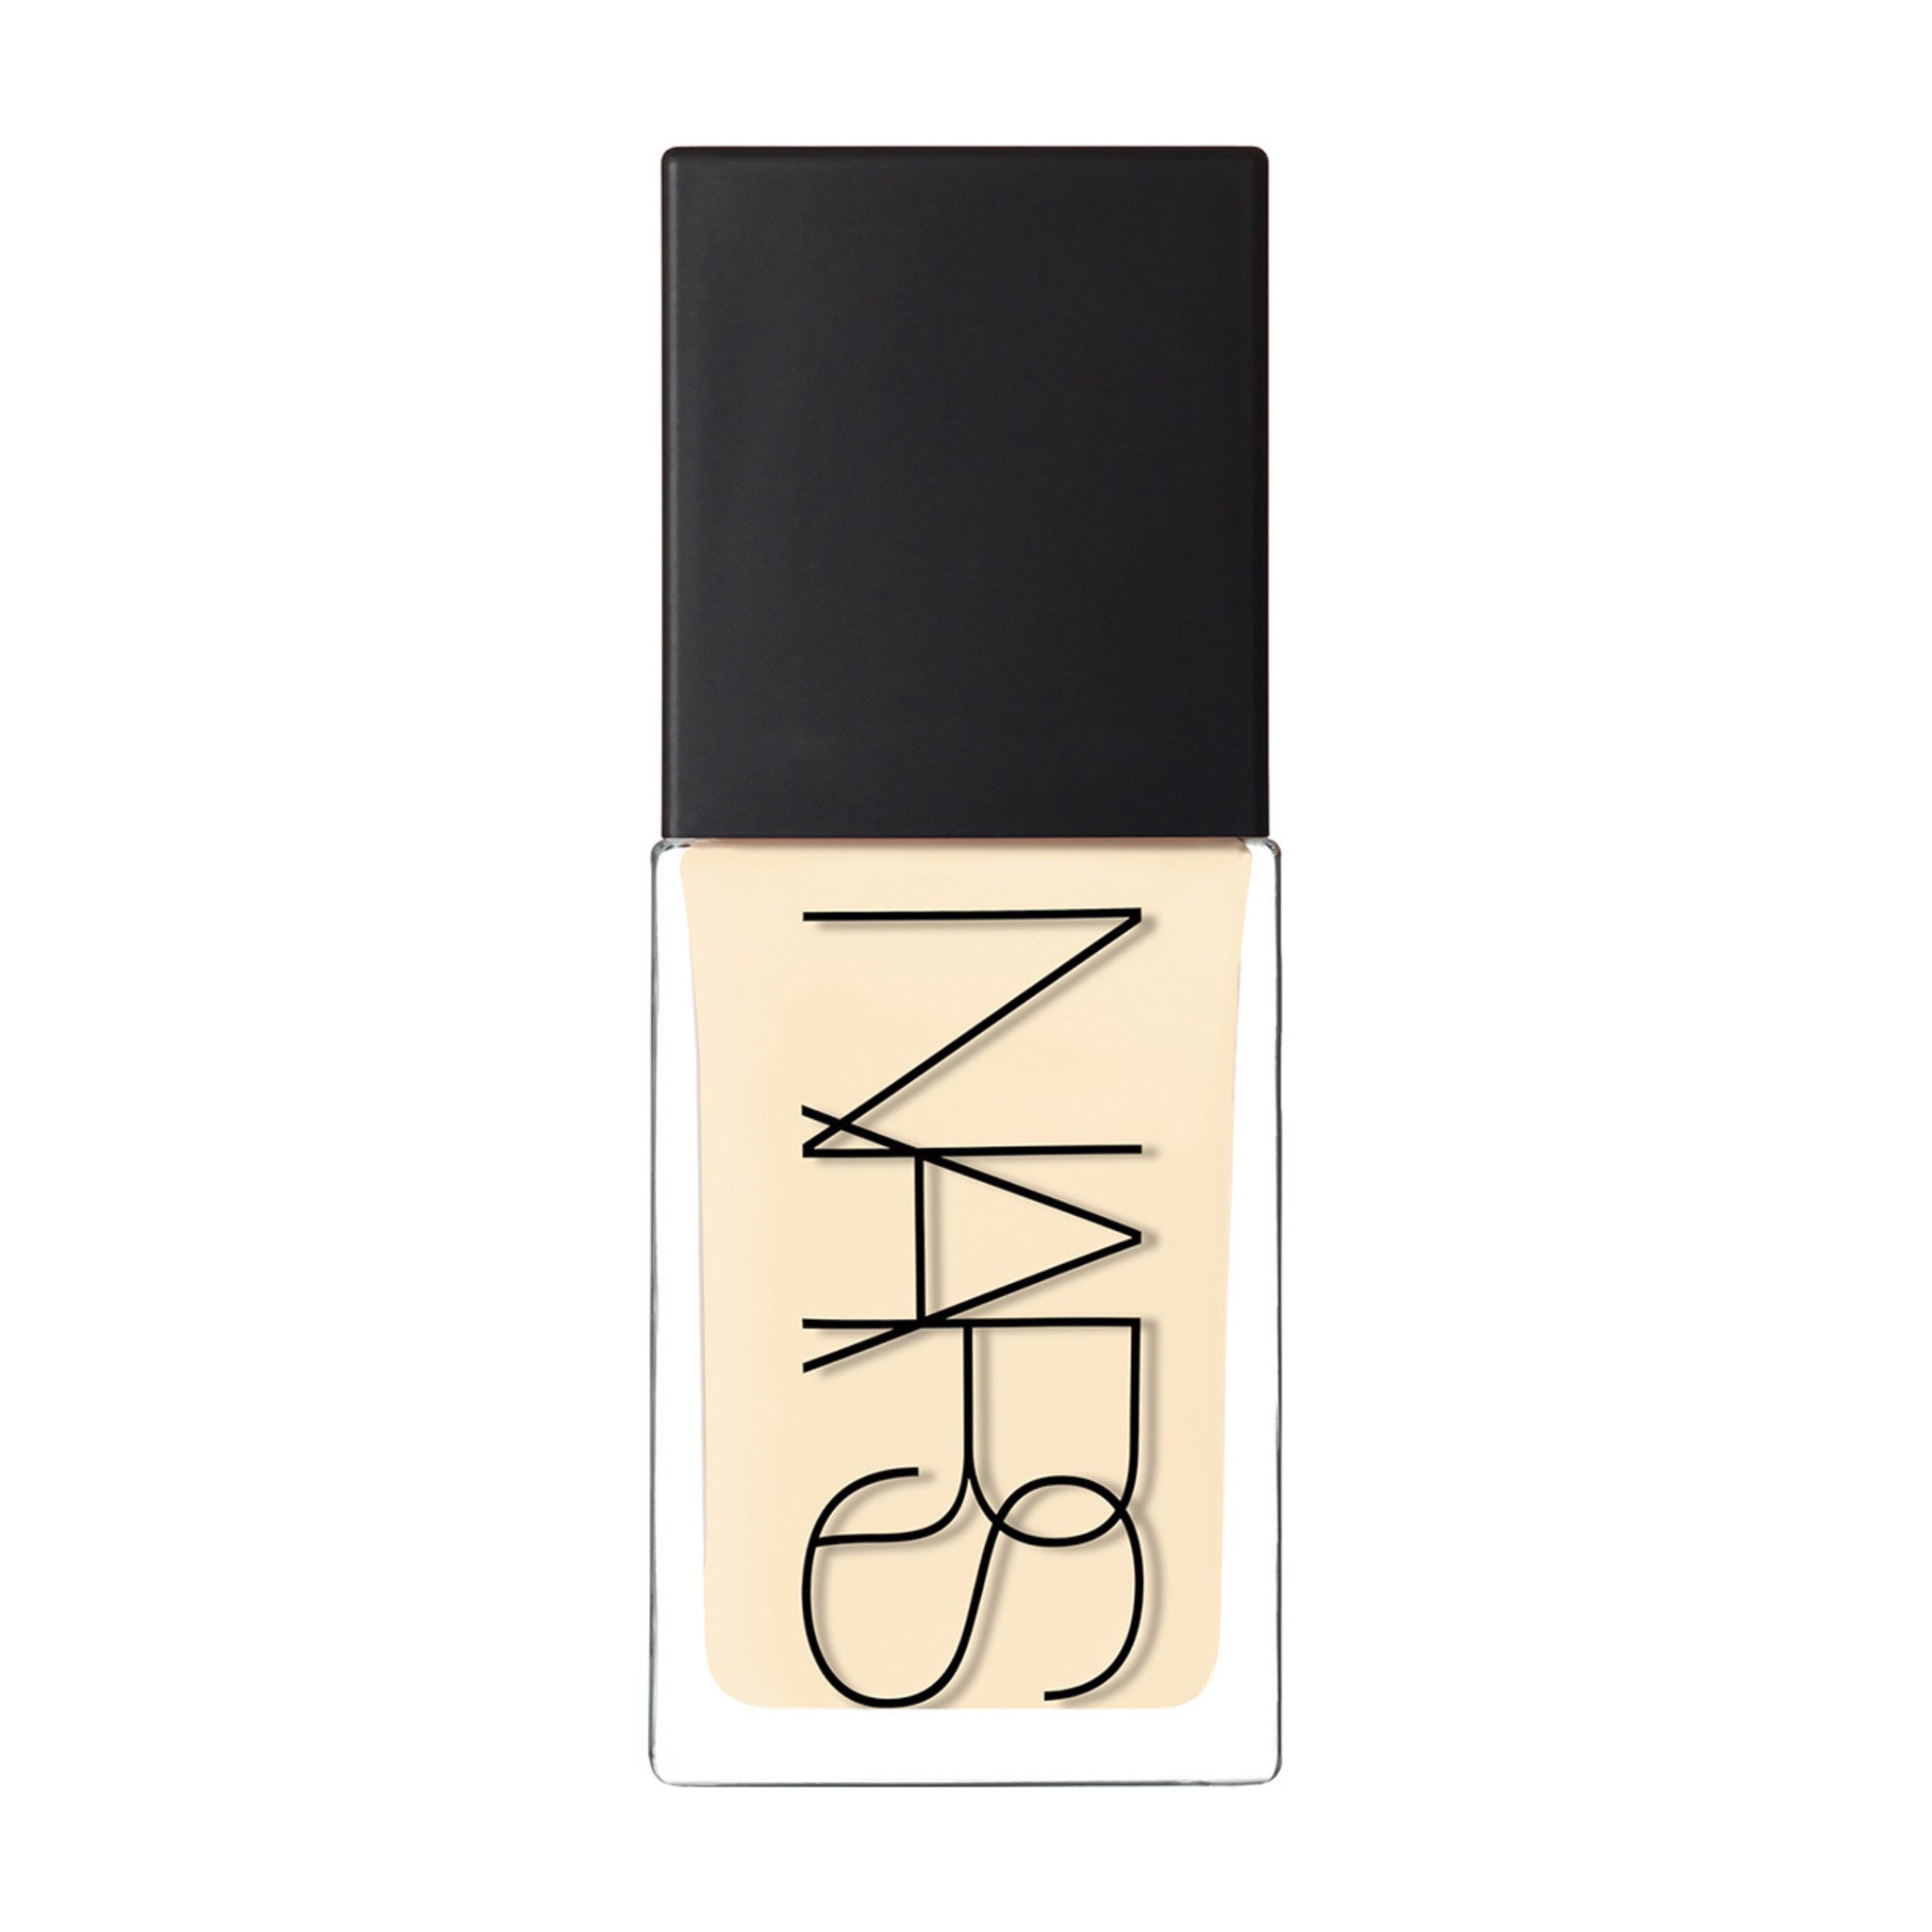 Nars Light Reflecting Foundation Color/Shade variant: Siberia L0 main image. This product is for light warm complexions